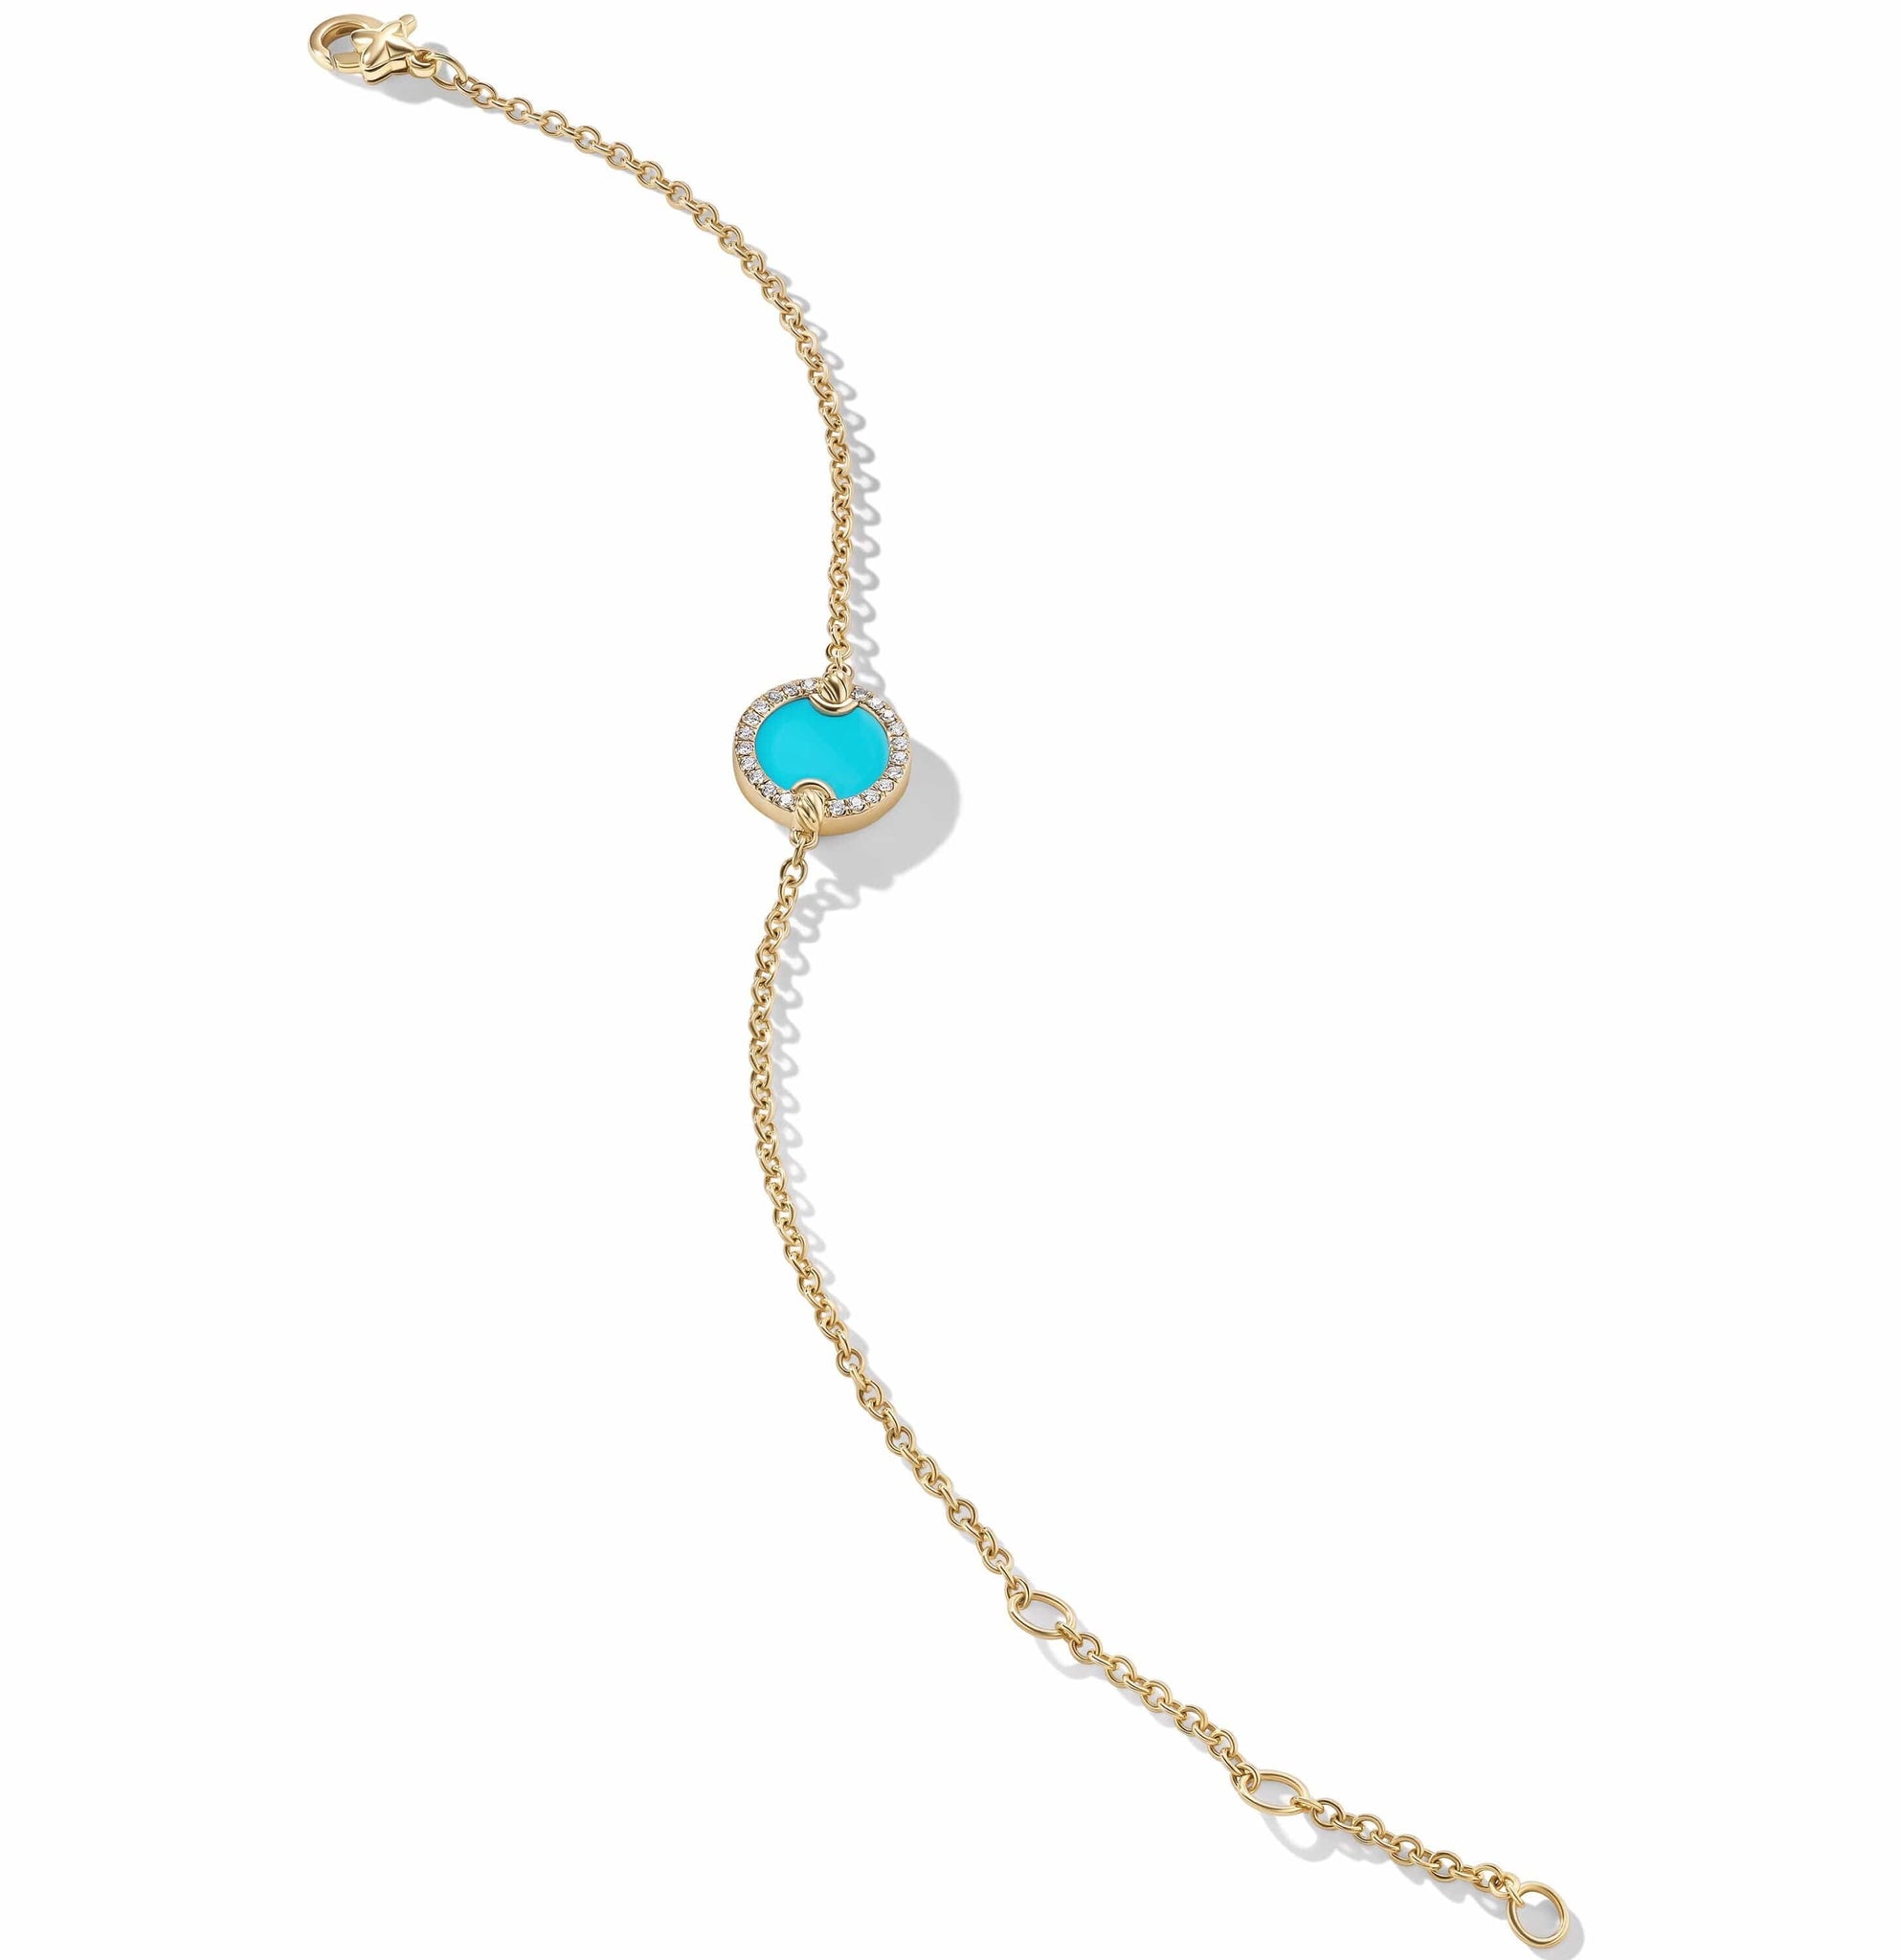 Petite DY Elements® Center Station Chain Bracelet in 18K Yellow Gold with Turquoise and Pavé Diamonds